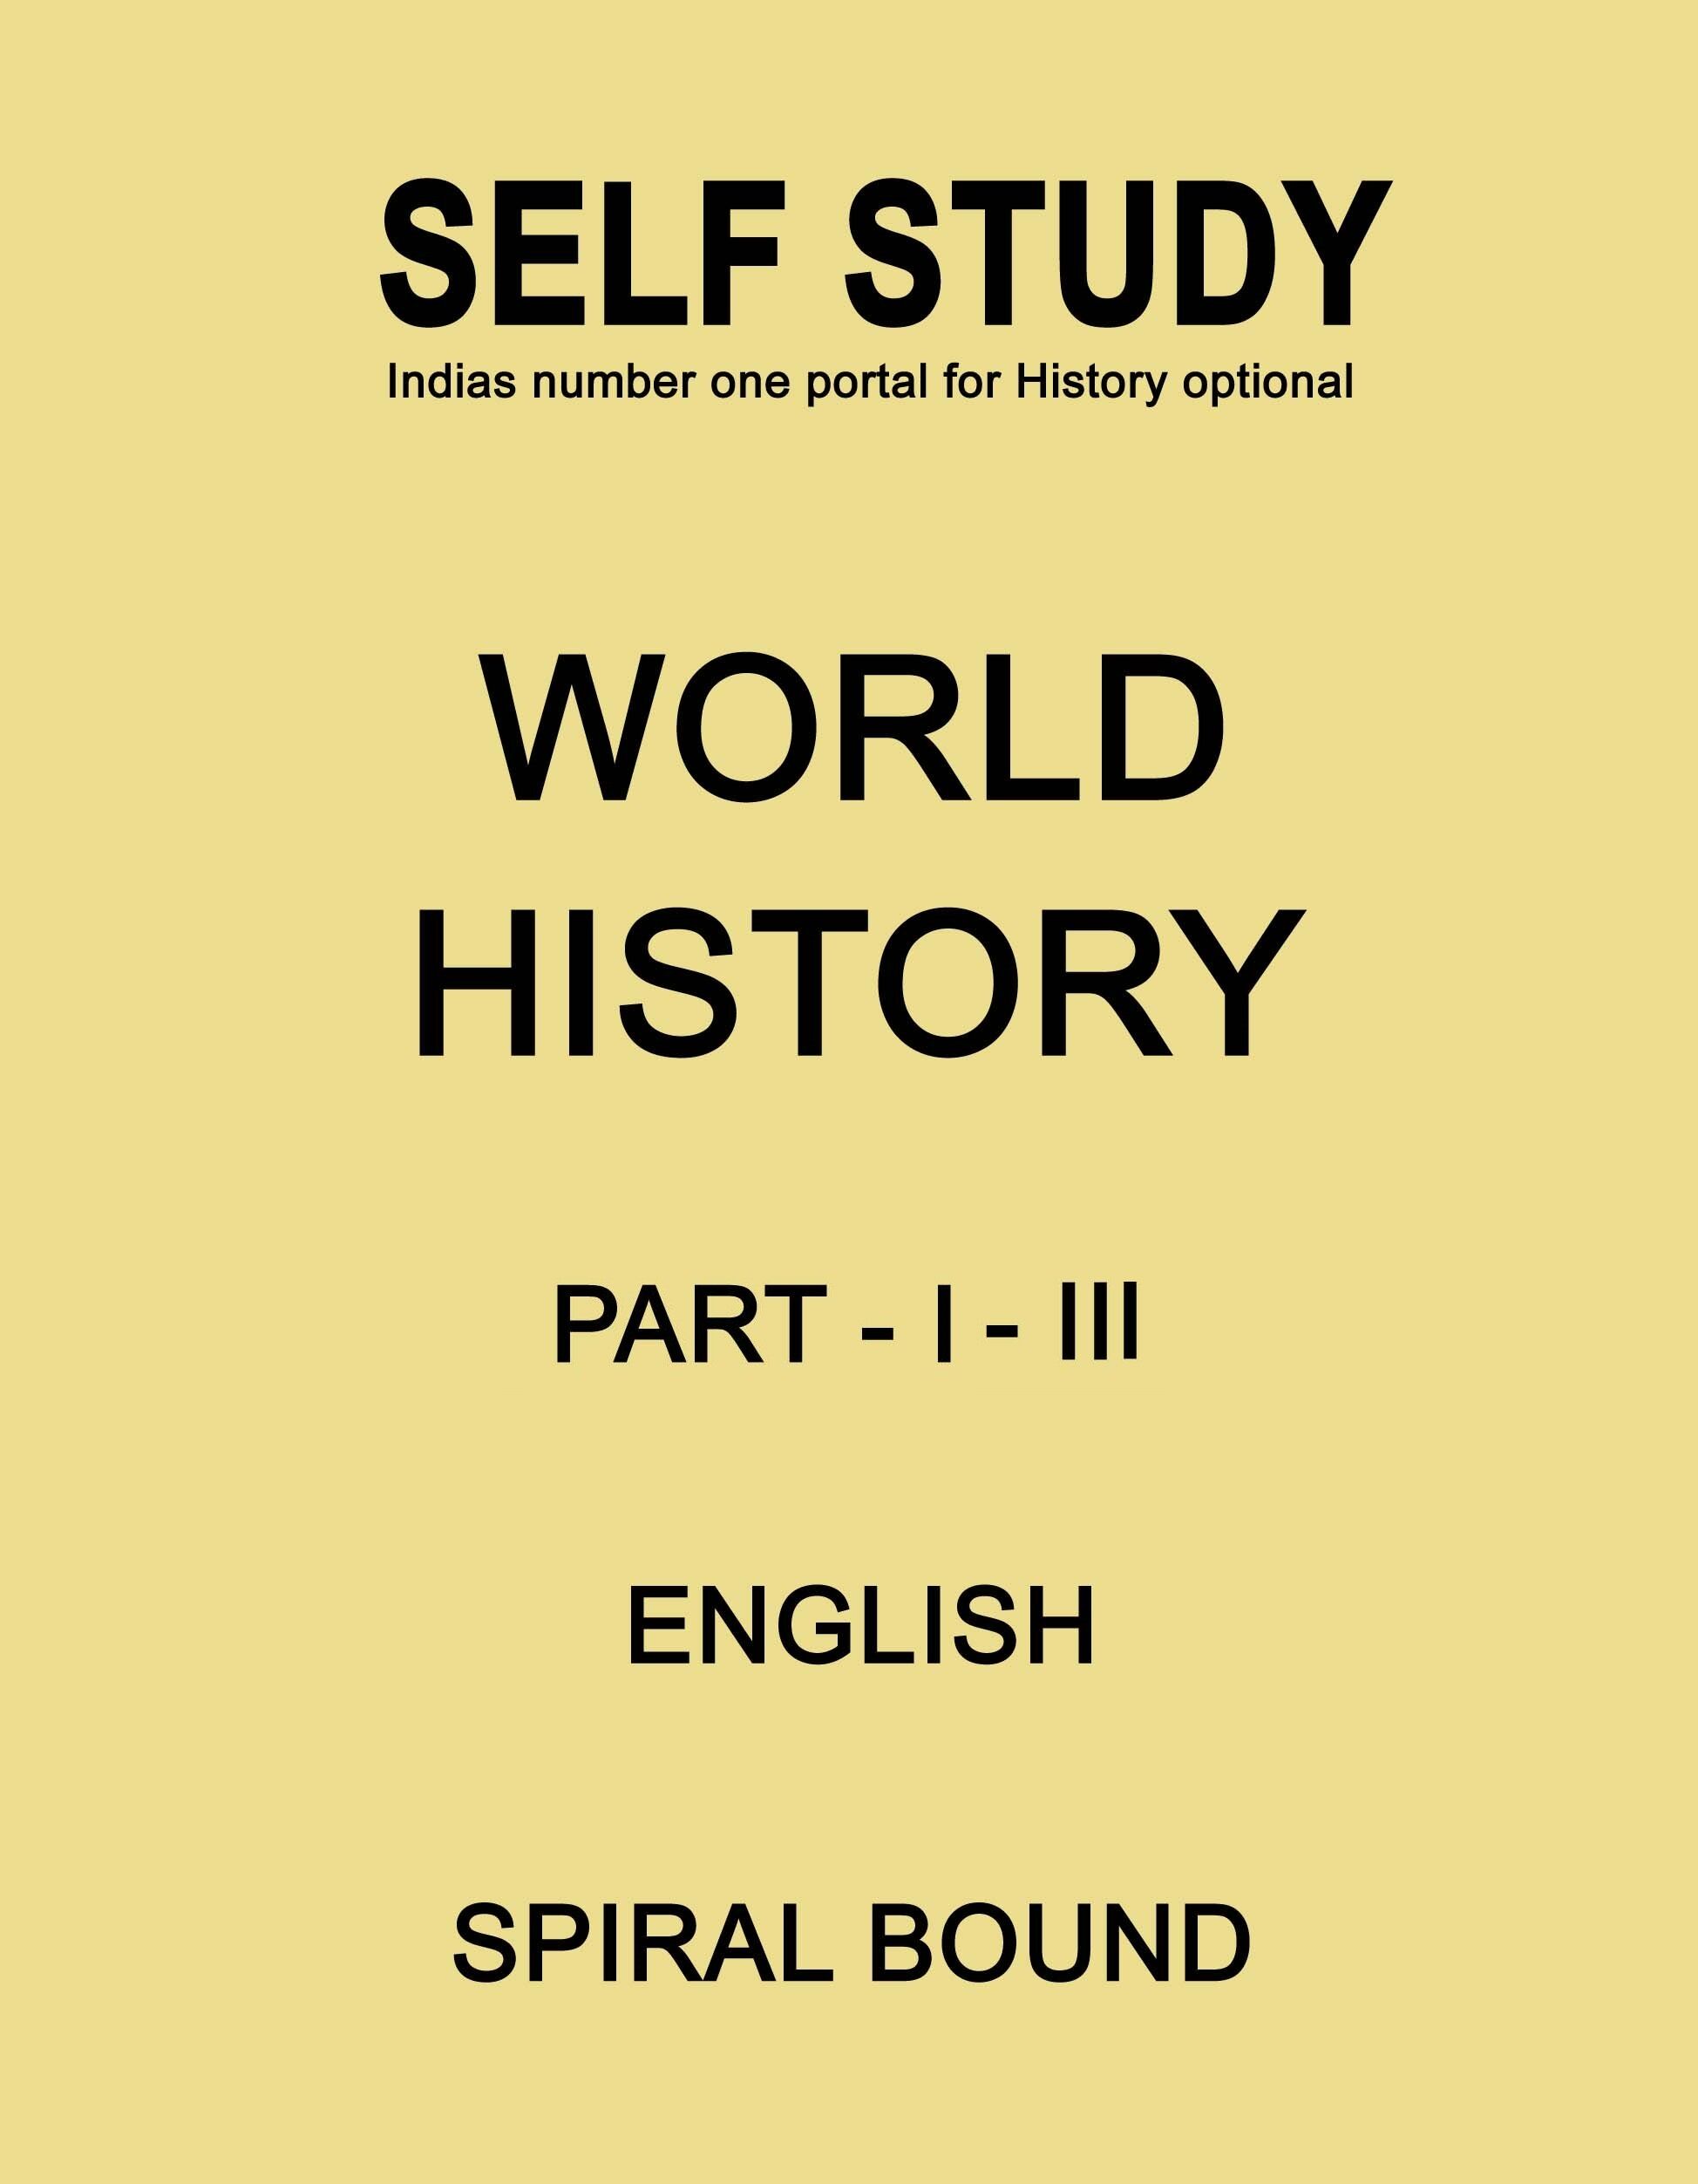 world-history-part-1-and-3-printed-notes-by-self-study-in-english-for-ias-mains